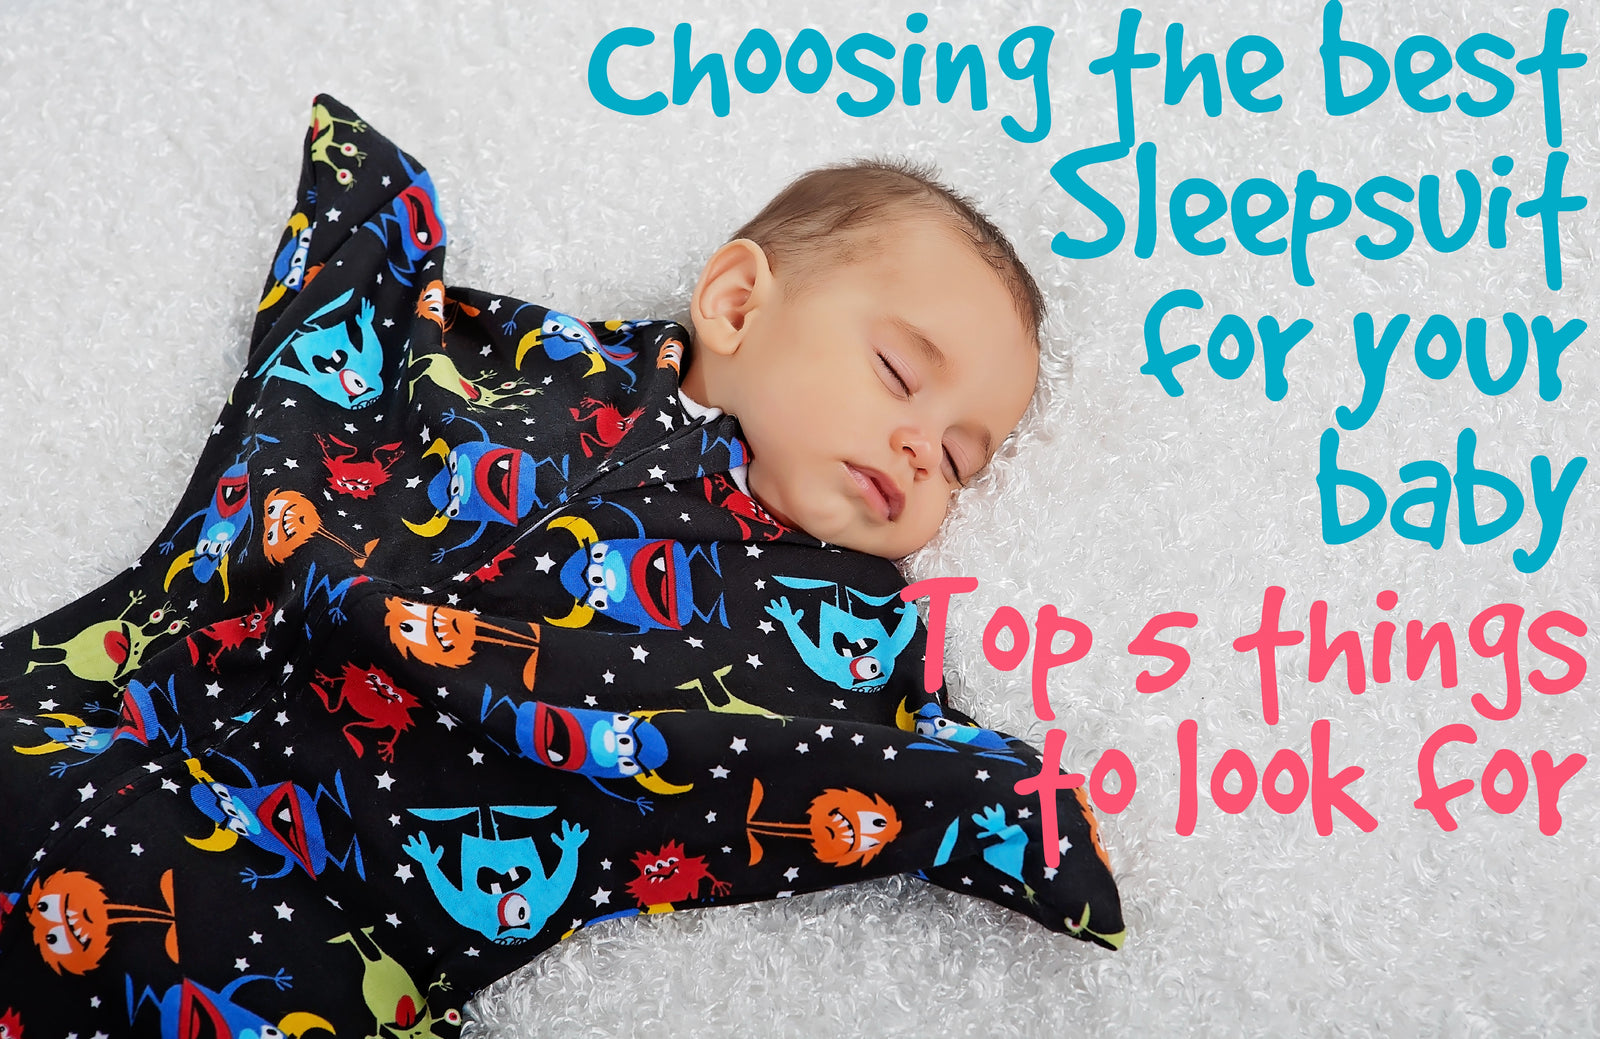 Searching for the Best Sleeping Bag for Your Baby? Top 5 Things to Look For